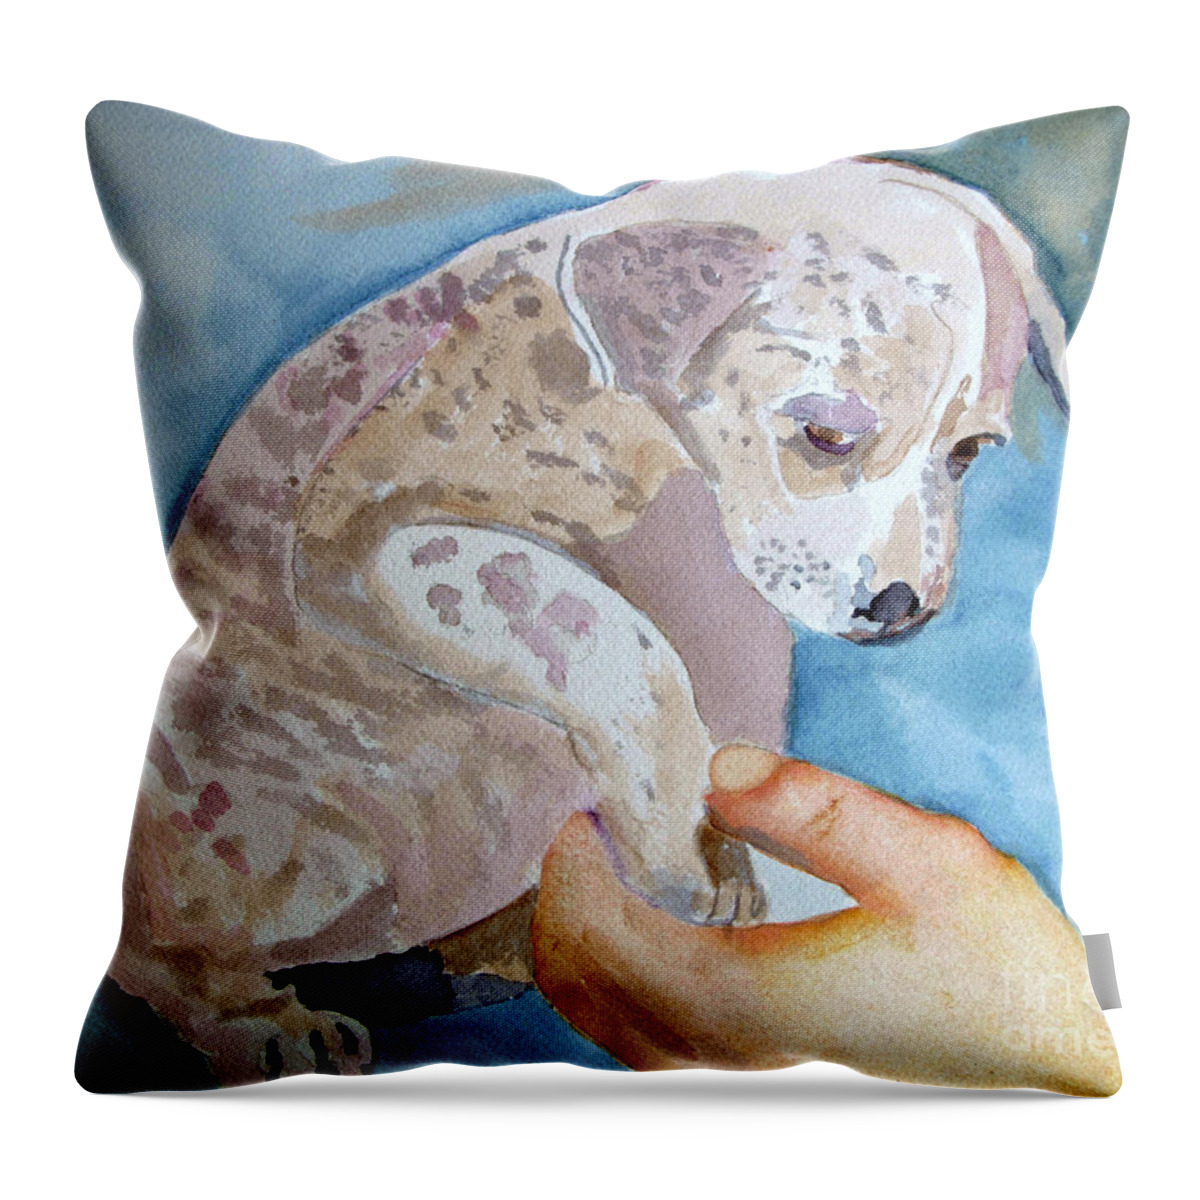 Puppy Throw Pillow featuring the painting Puppy Shaking Hands by Sandy McIntire